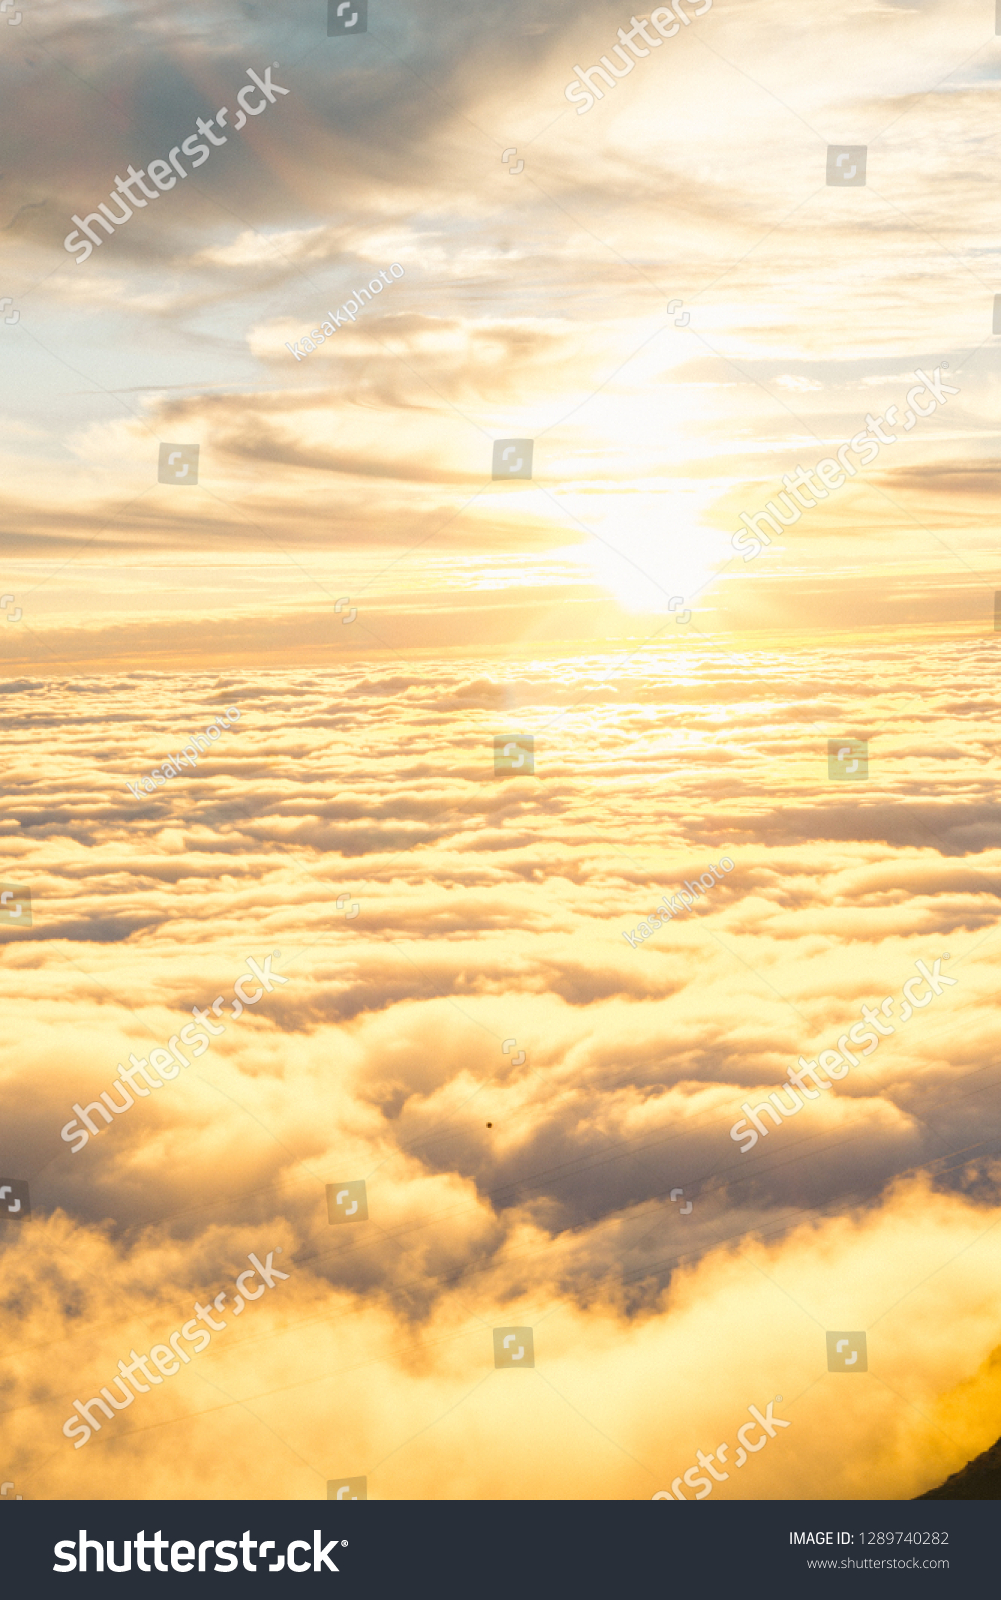 Landscape misty panorama. Fantastic dreamy sunrise on rocky mountains with view into misty valley below #1289740282